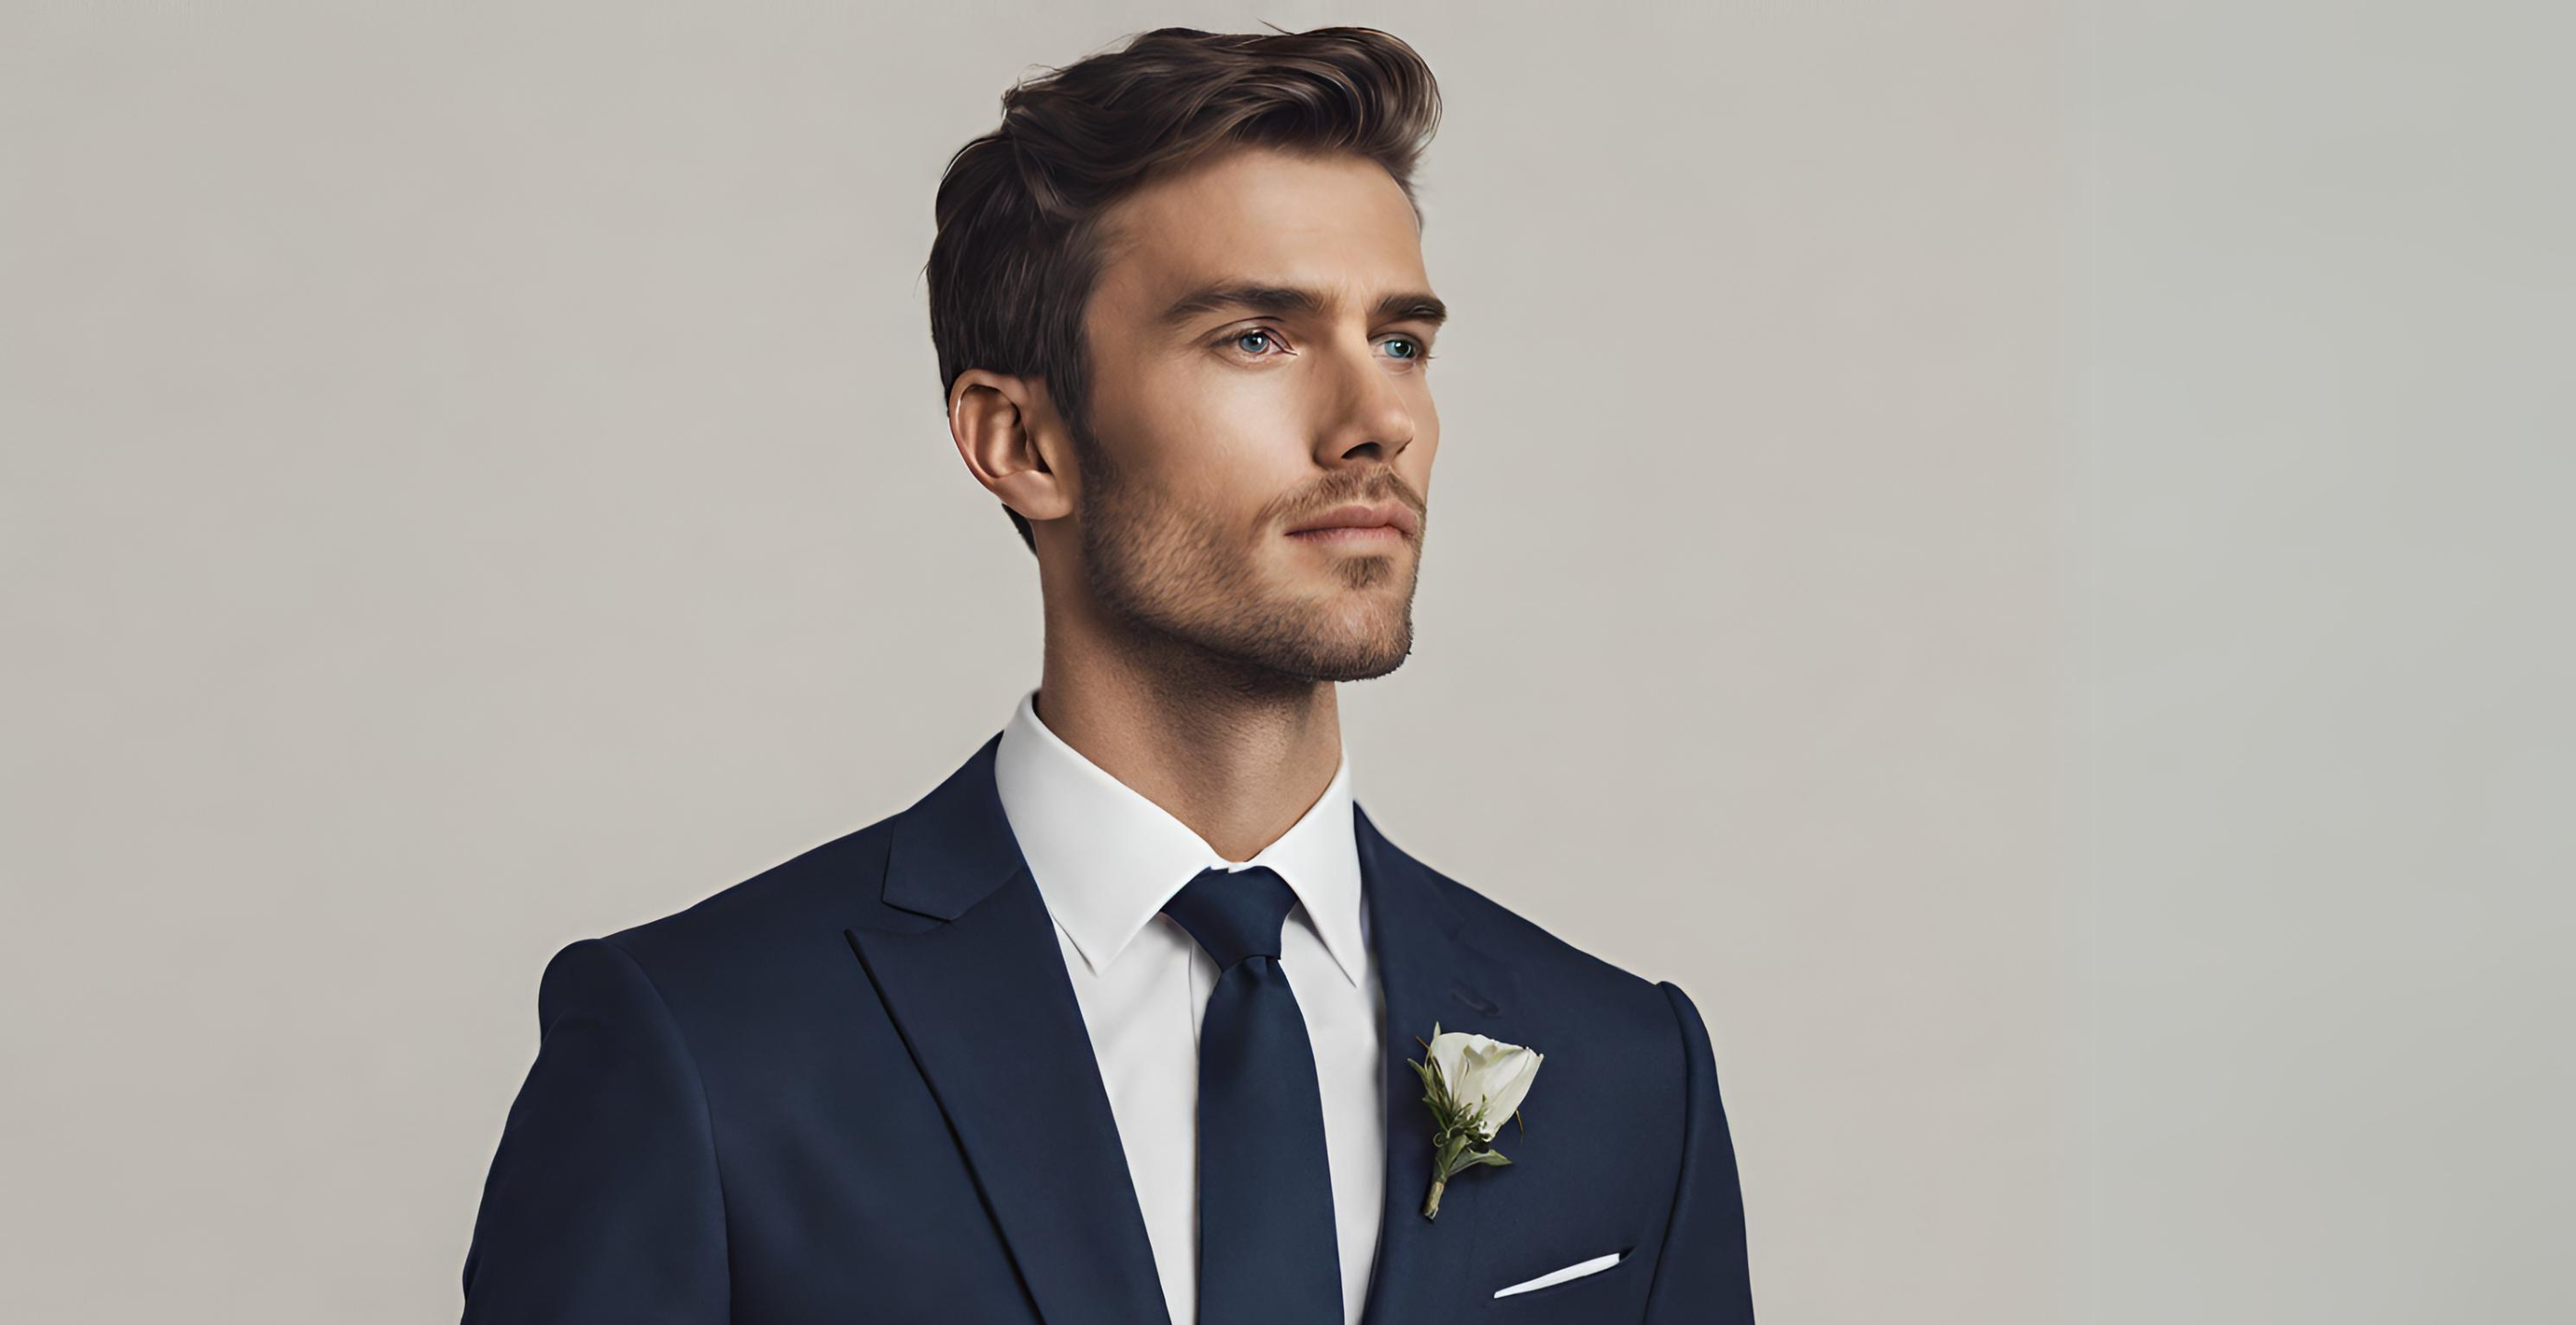 navy blue suit and tie